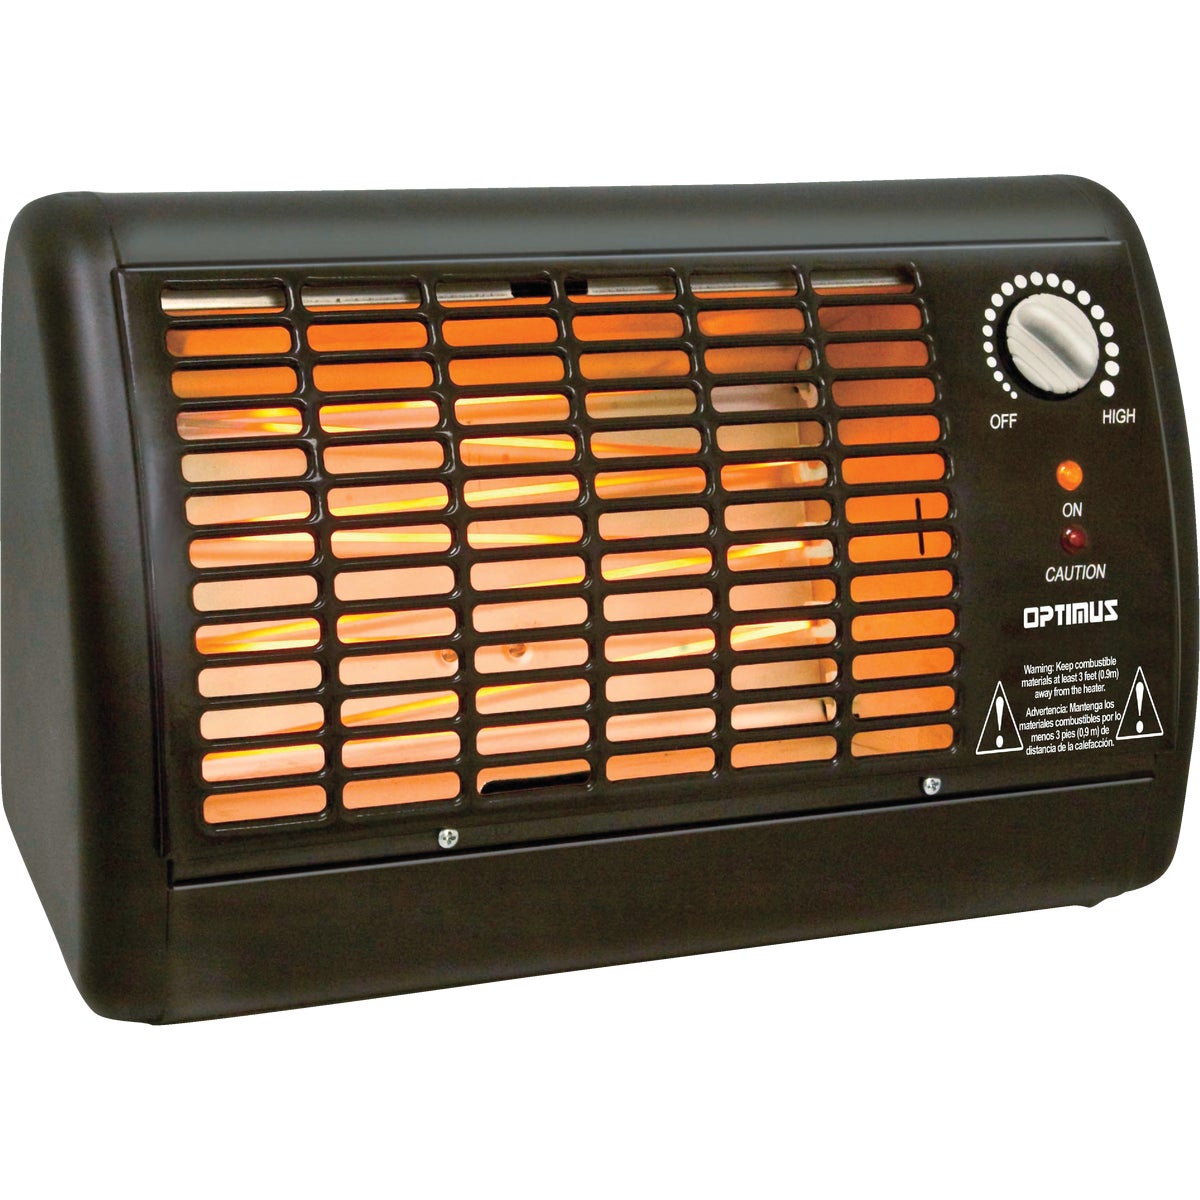 Optimus 1320W 120V Radiant Electric Space Heater